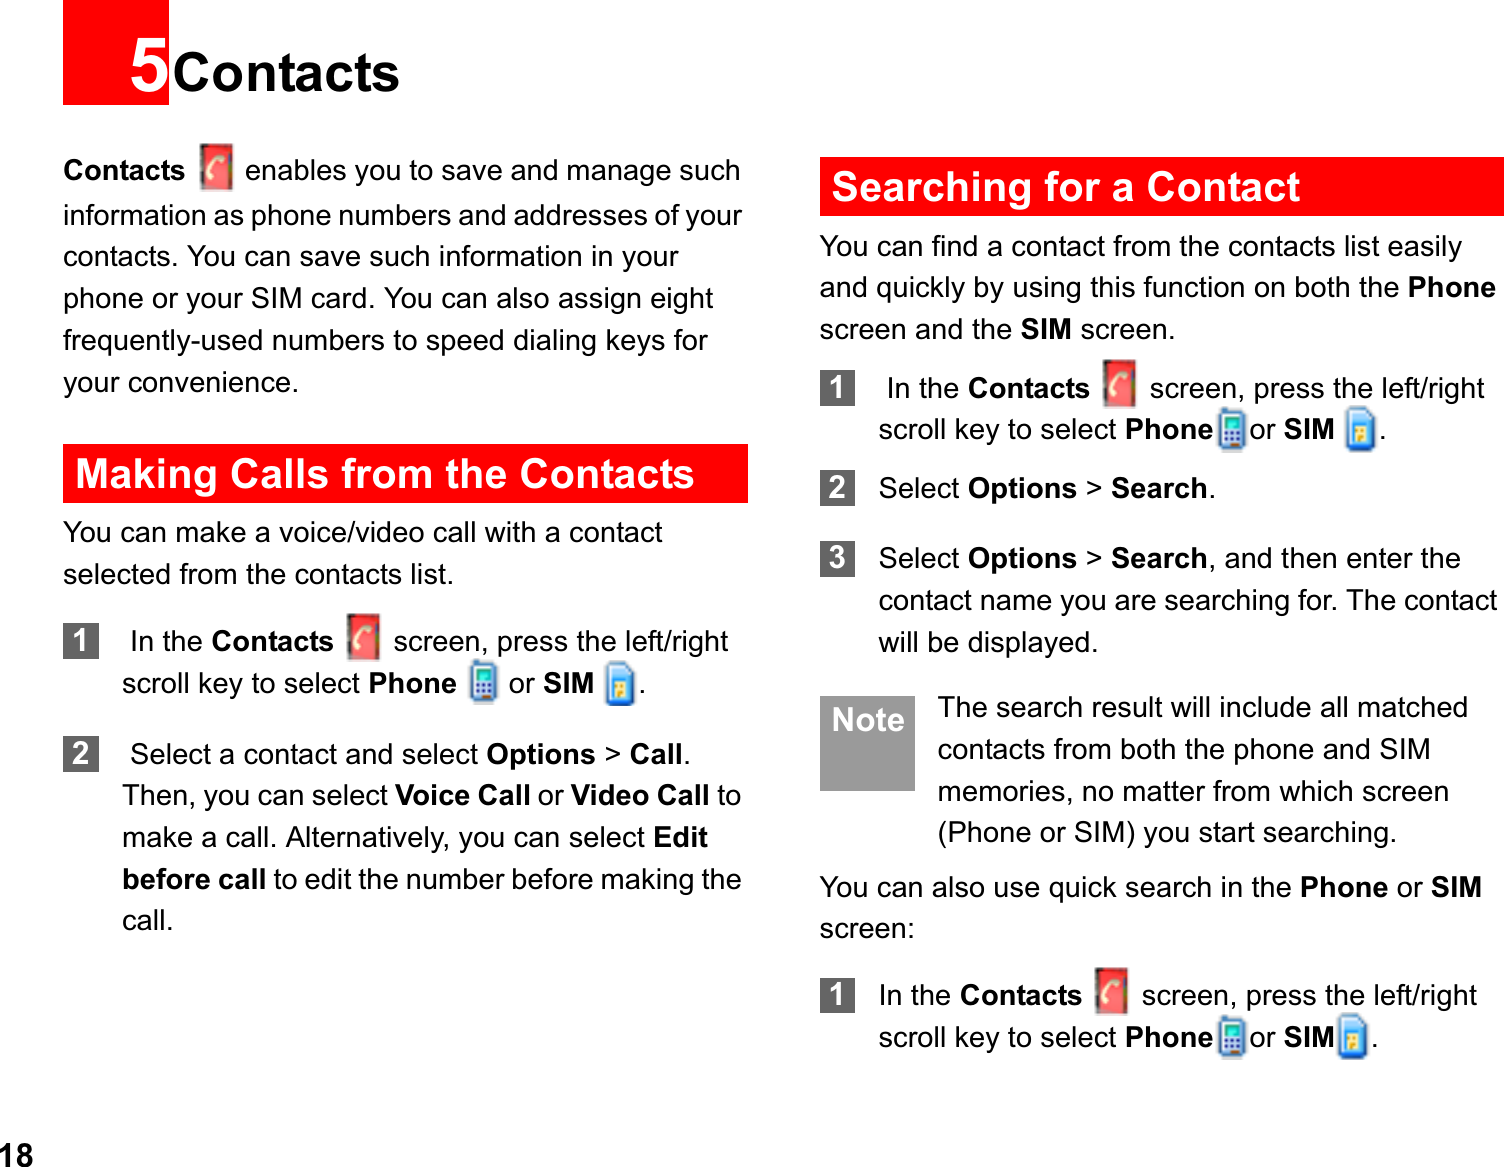 185ContactsContacts enables you to save and manage such information as phone numbers and addresses of your contacts. You can save such information in your phone or your SIM card. You can also assign eight frequently-used numbers to speed dialing keys for your convenience.Making Calls from the ContactsYou can make a voice/video call with a contact selected from the contacts list.1 In the Contacts screen, press the left/right scroll key to select Phone  or SIM  .2 Select a contact and select Options &gt; Call.Then, you can select Voice Call or Video Call to make a call. Alternatively, you can select Editbefore call to edit the number before making the call.Searching for a ContactYou can find a contact from the contacts list easily and quickly by using this function on both the Phonescreen and the SIM screen.1 In the Contacts screen, press the left/right scroll key to select Phone or SIM  .2Select Options &gt; Search.3Select Options &gt; Search, and then enter the contact name you are searching for. The contact will be displayed. Note The search result will include all matched contacts from both the phone and SIM memories, no matter from which screen (Phone or SIM) you start searching.You can also use quick search in the Phone or SIMscreen:1In the Contacts screen, press the left/right scroll key to select Phone or SIM .